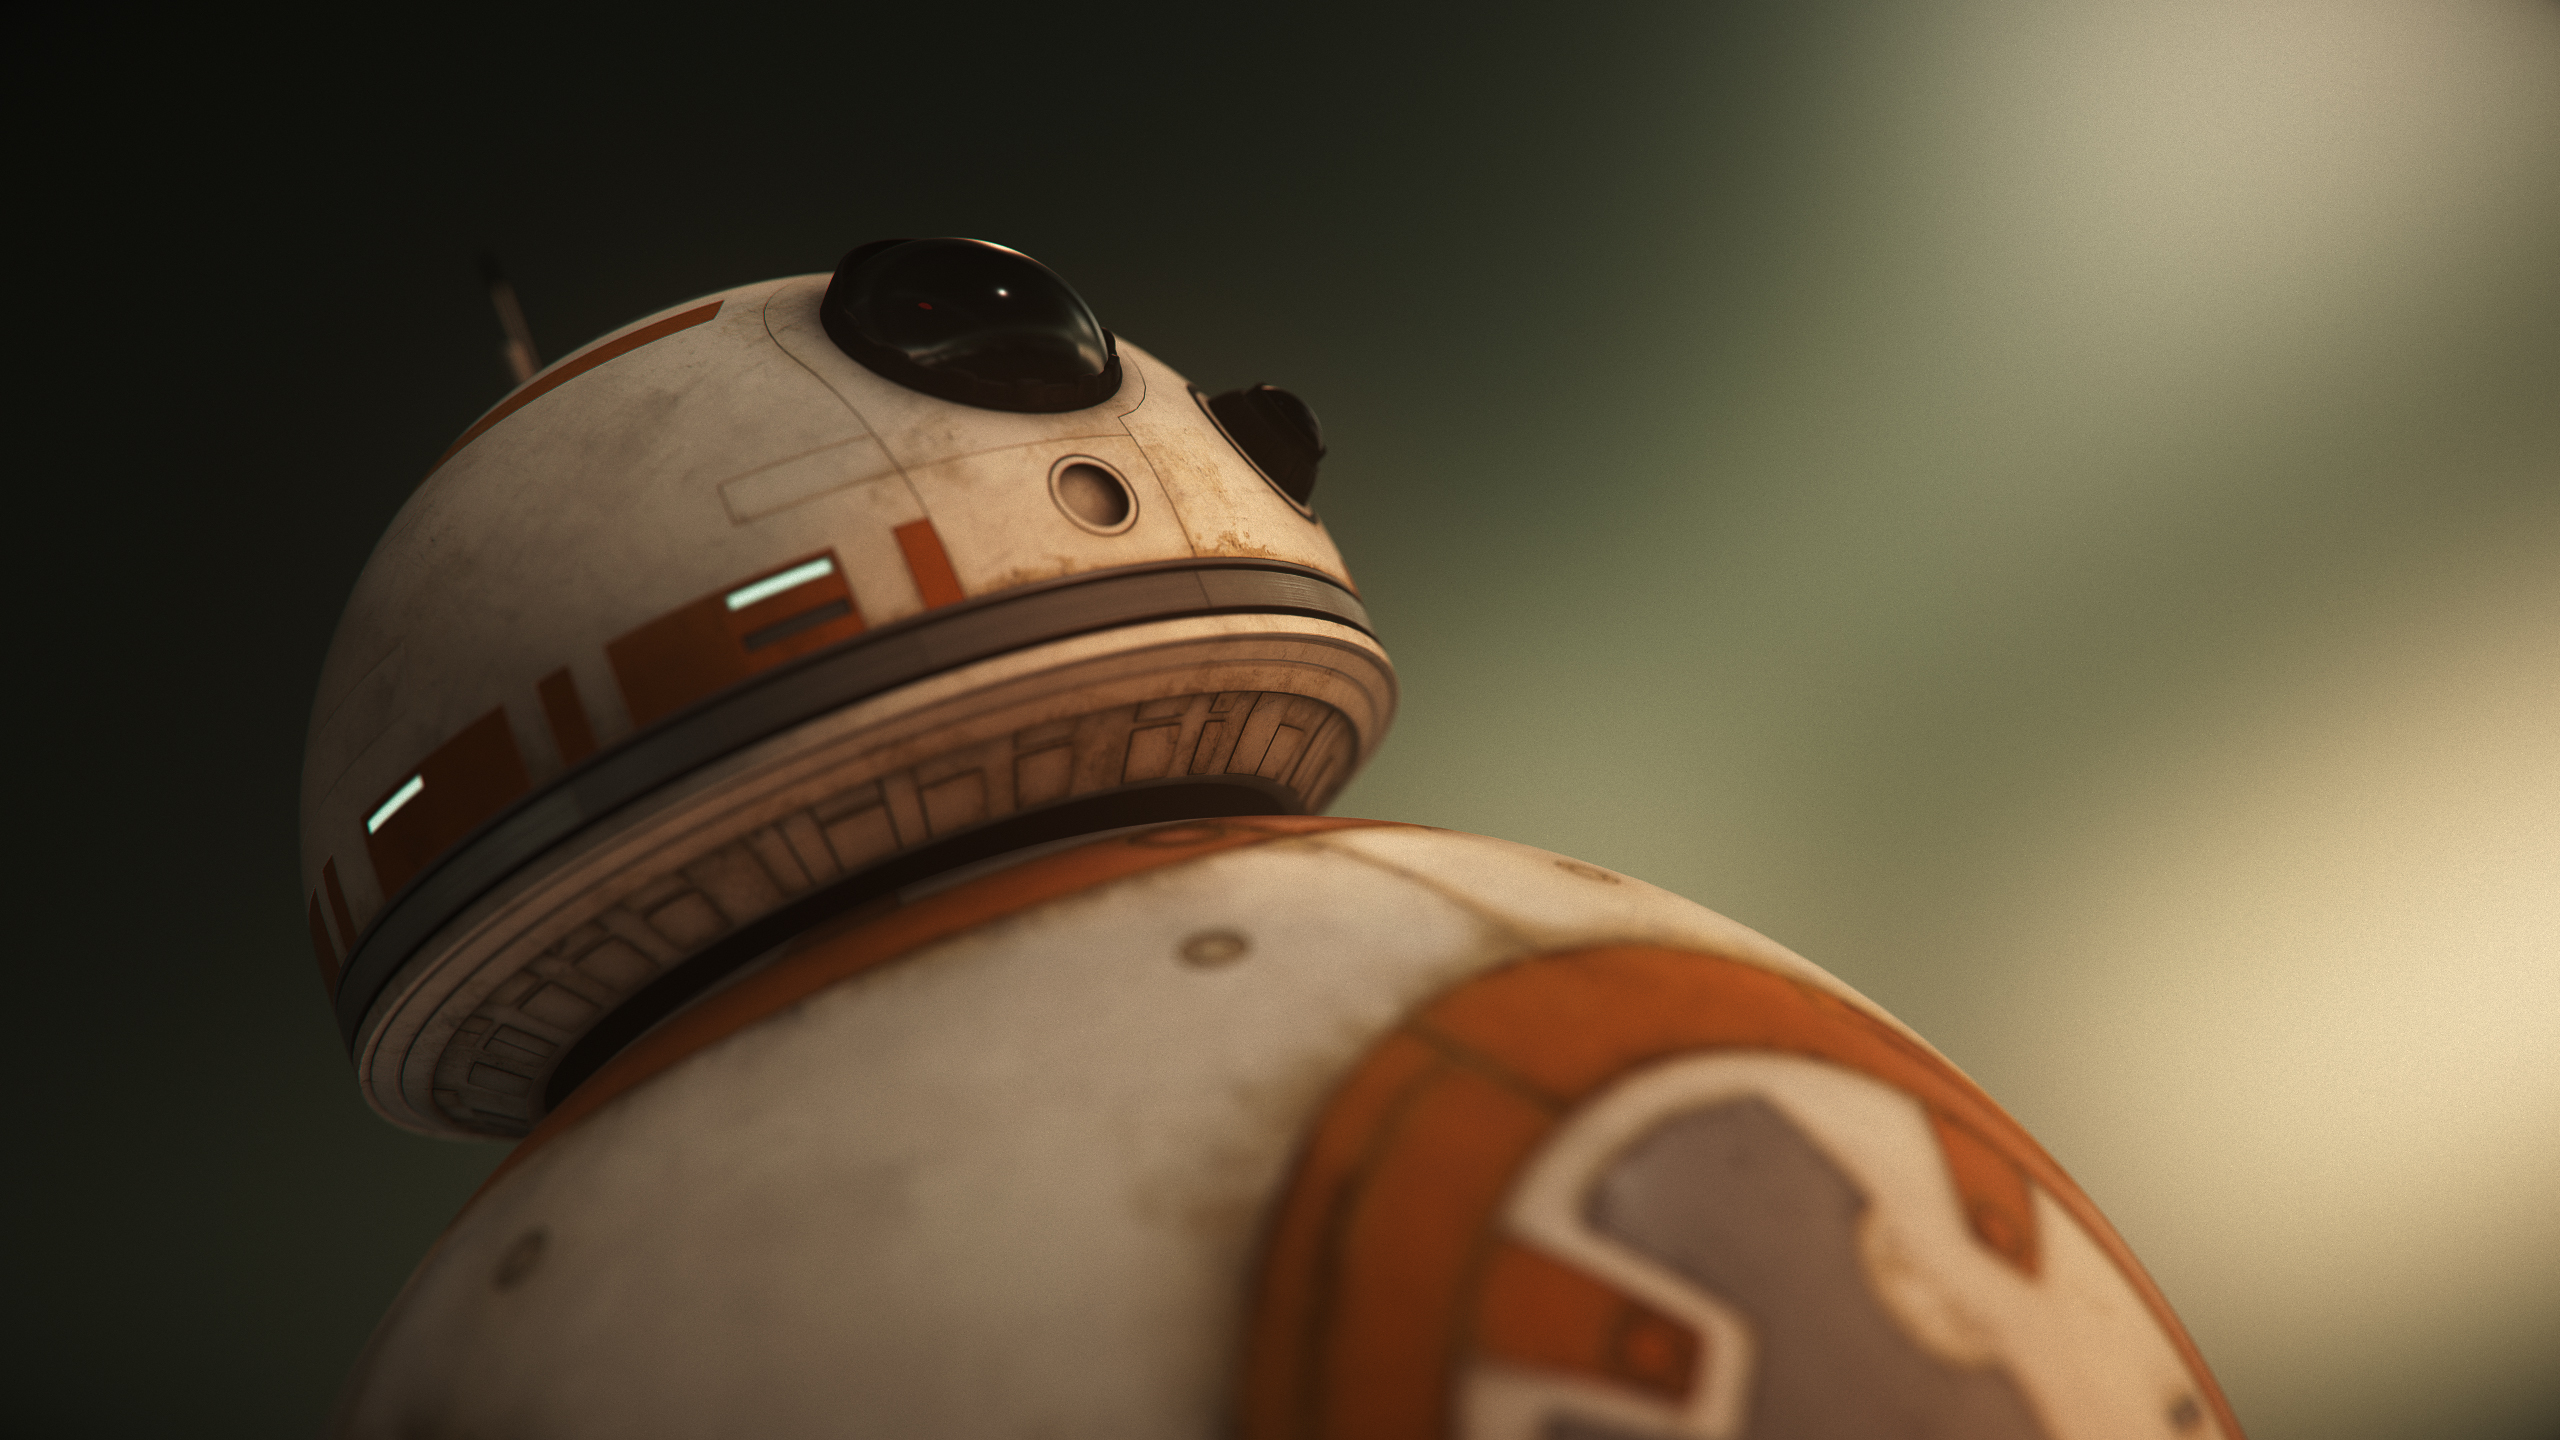 BB-8 Droid in Star Wars Wallpapers